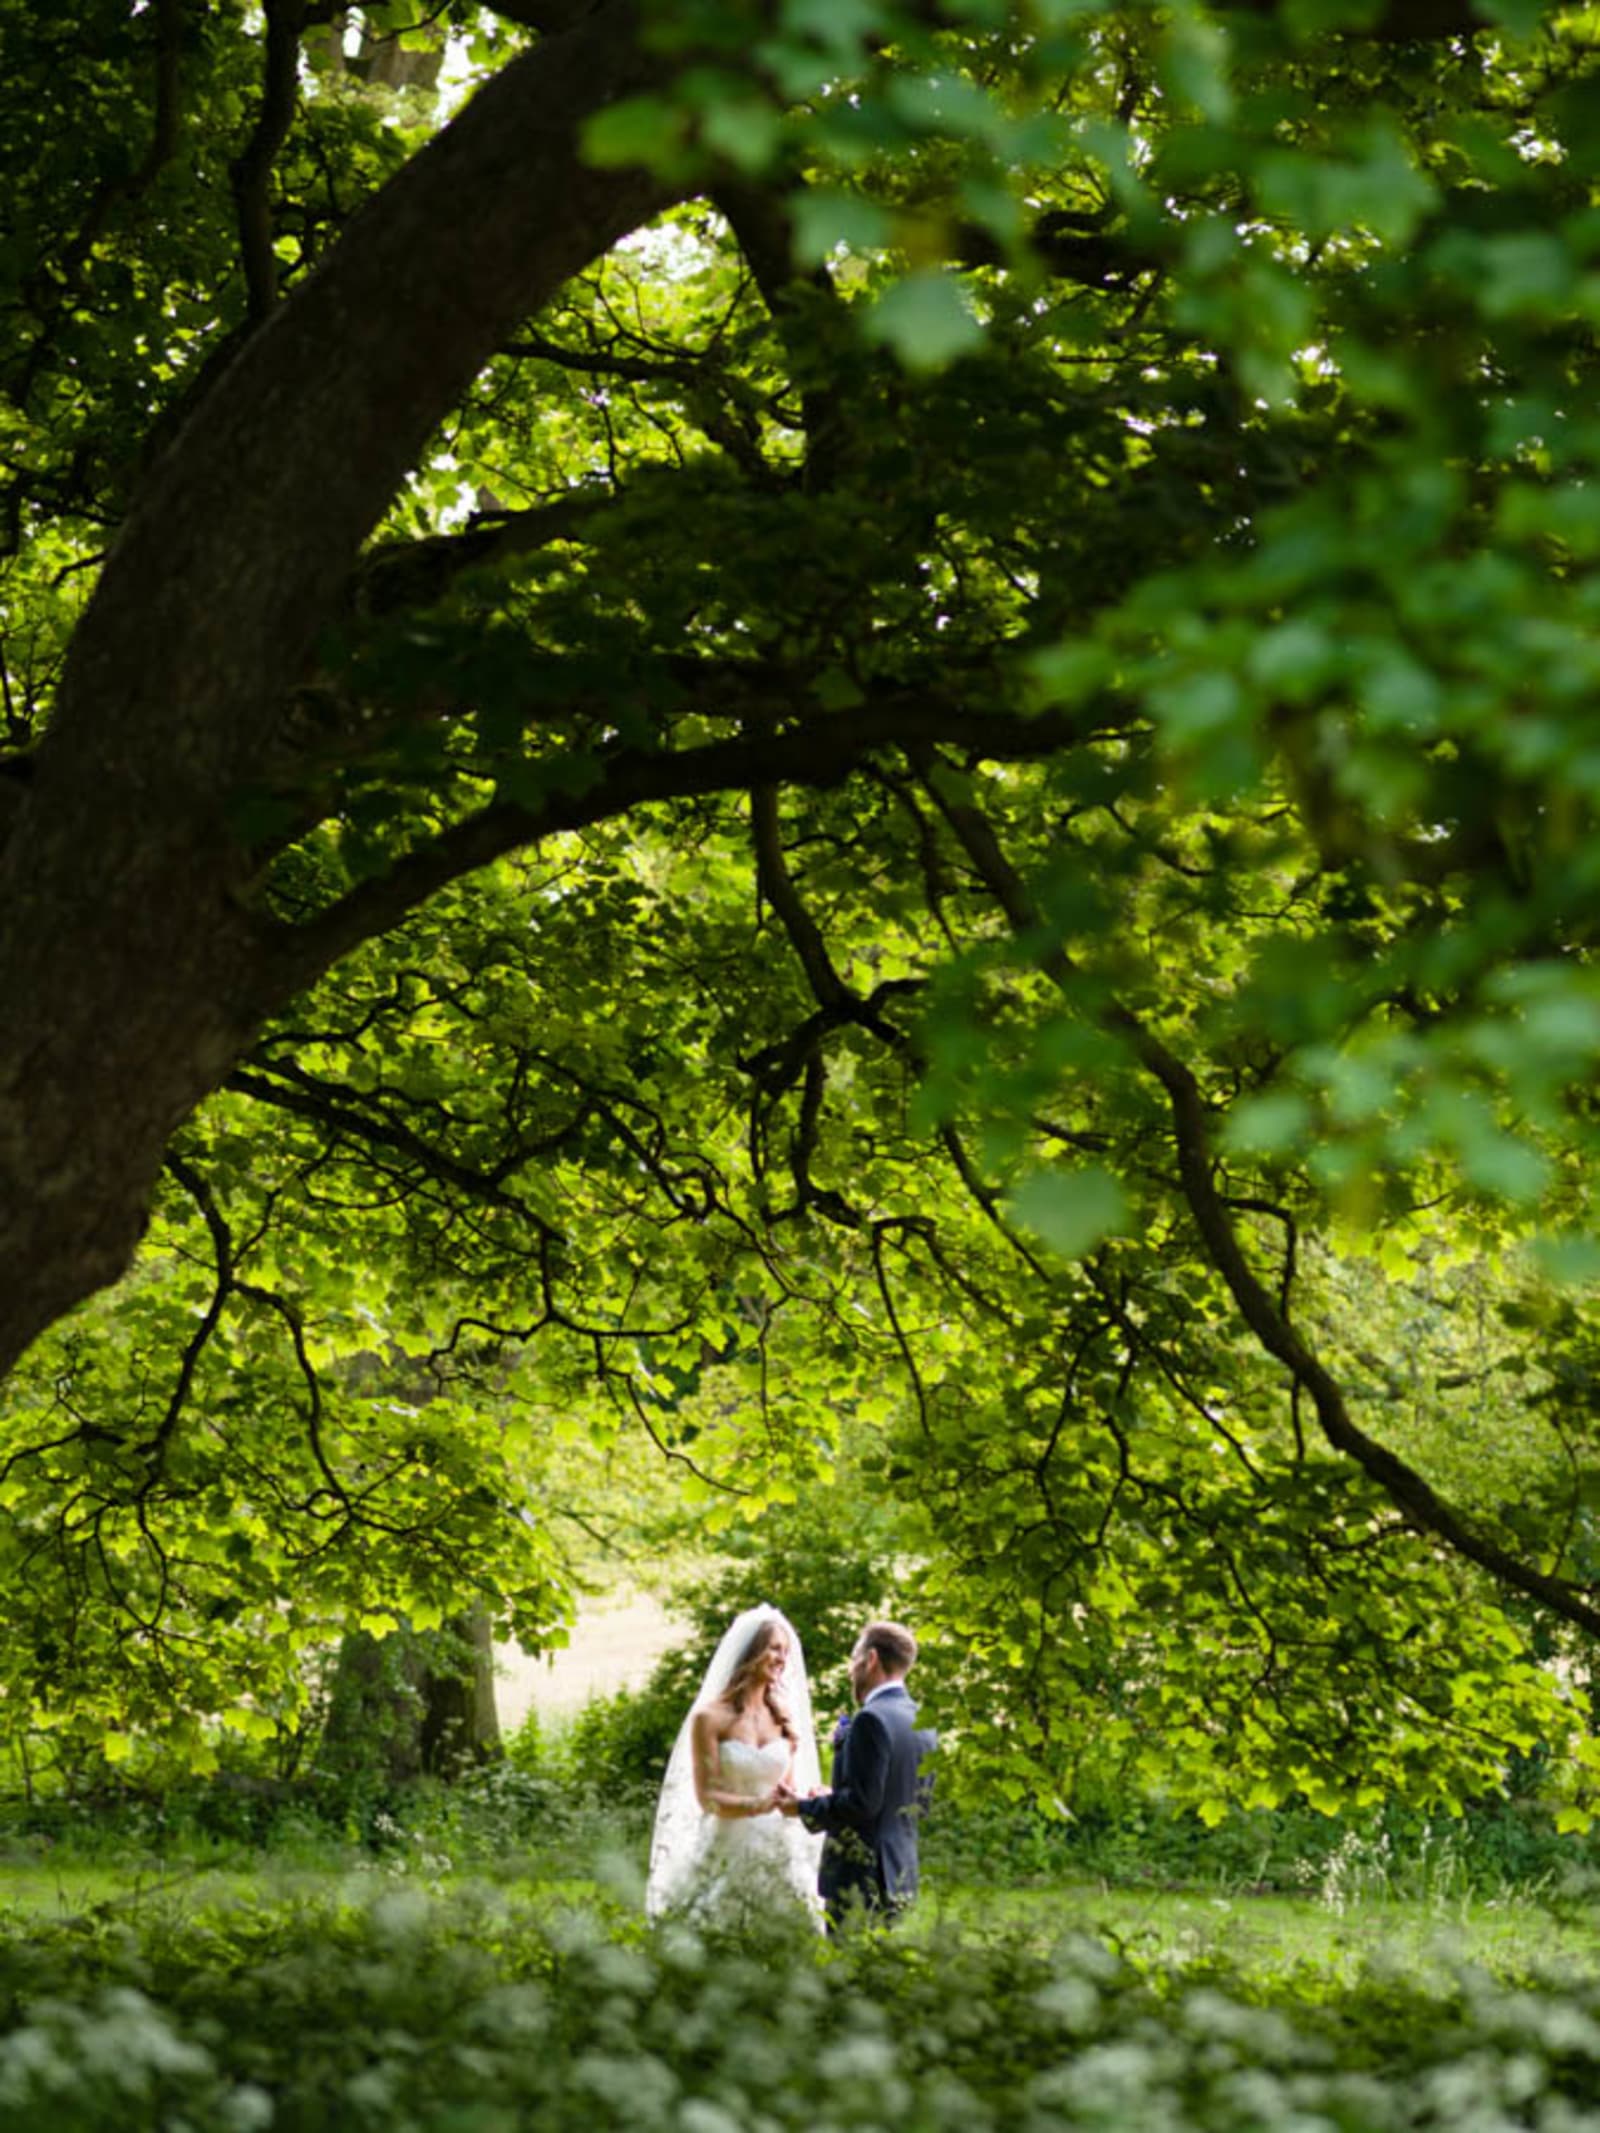 South West | Somerset | Frome | Summer | Classic | Outdoor | Blue | White | Country House | Real Wedding | Chris Giles Photography #Bridebook #RealWedding #WeddingIdeas Bridebook.co.uk 